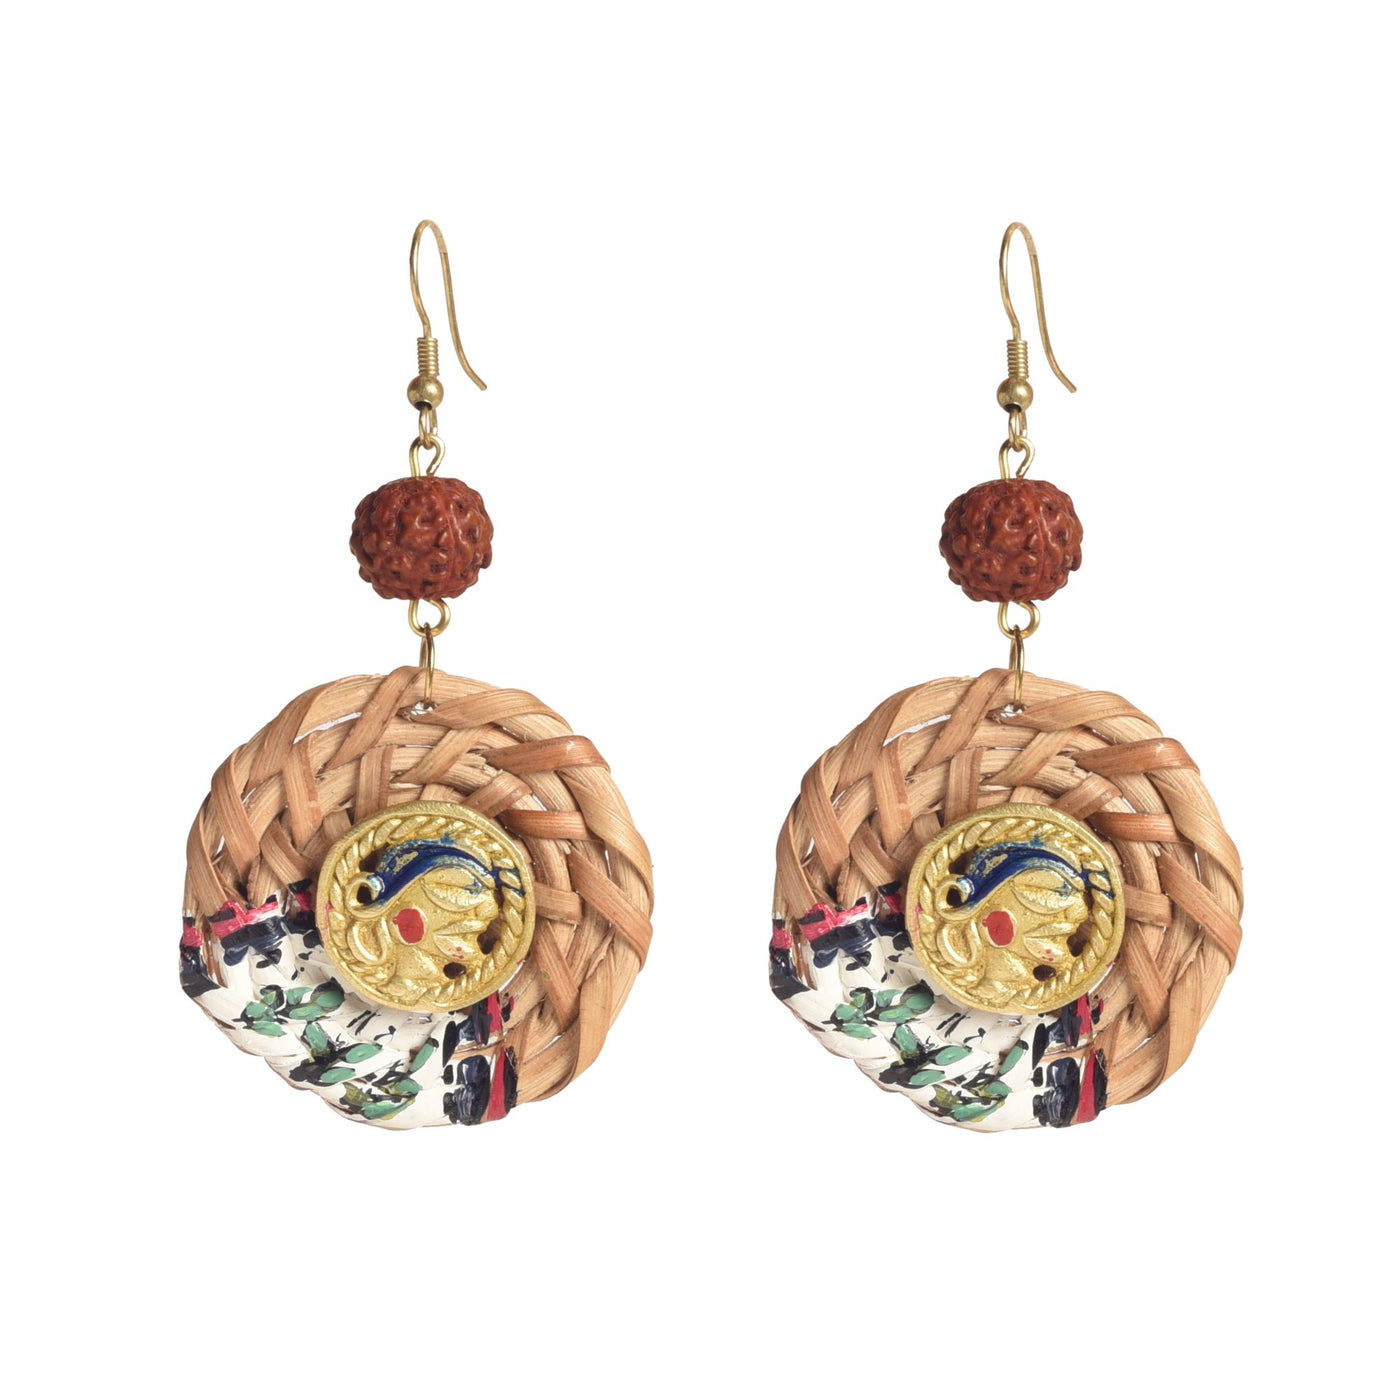 The Queens Grace Handcrafted Tribal Earrings - Fashion & Lifestyle - 4